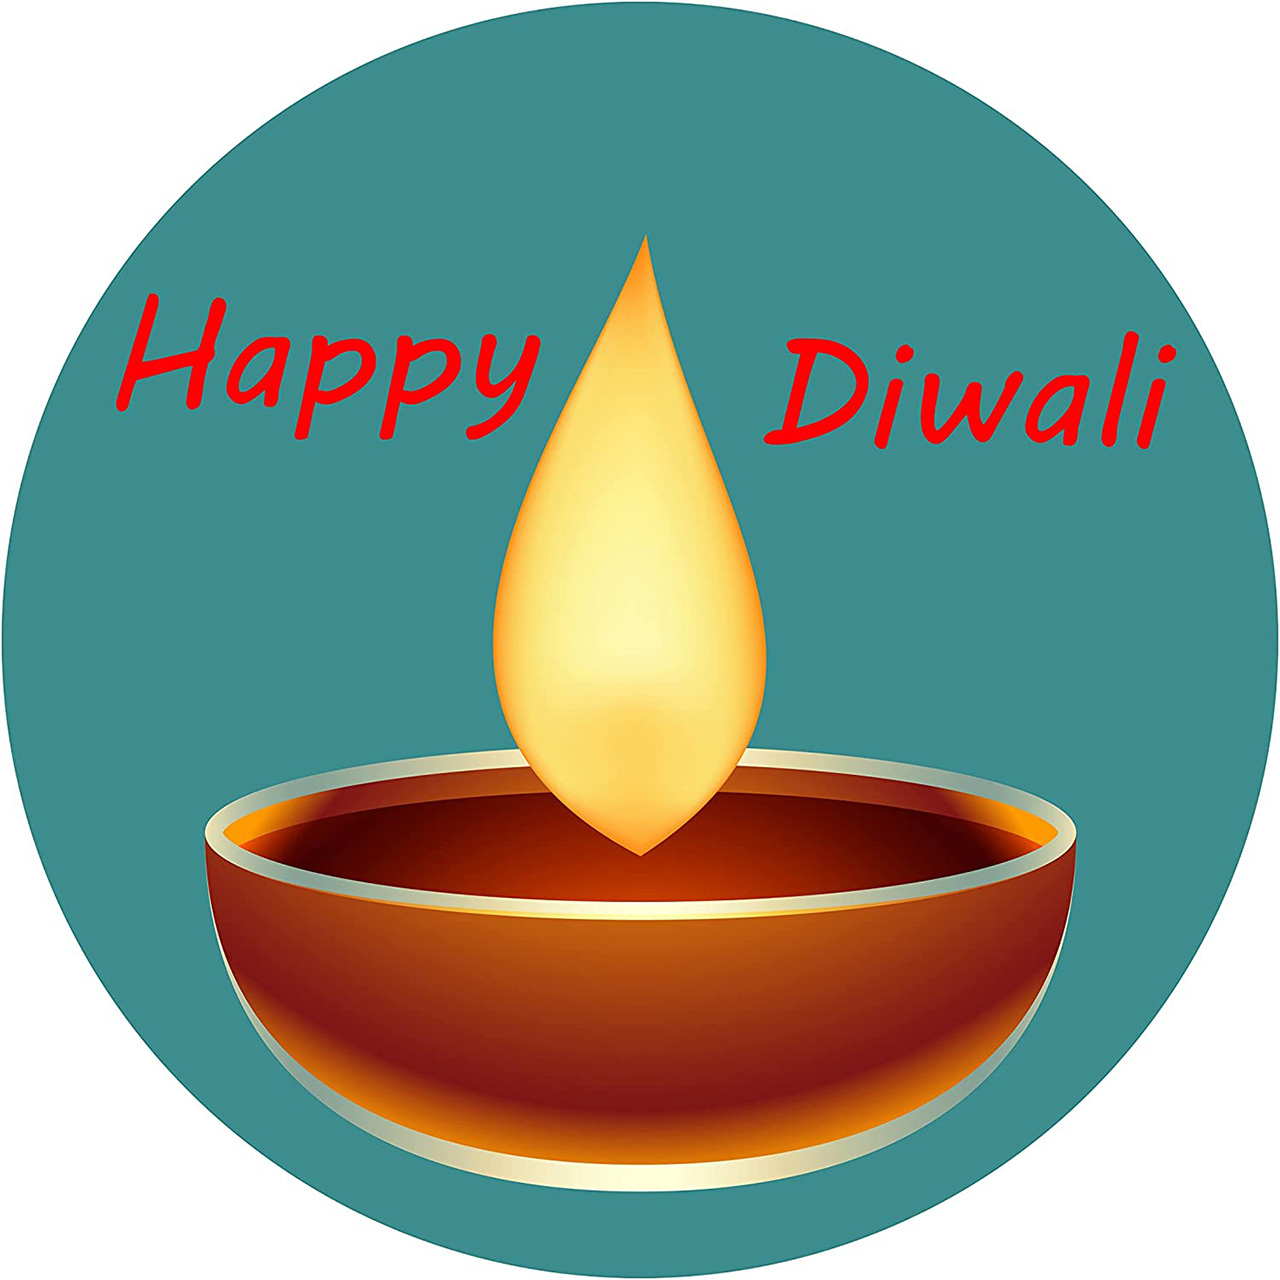 Diwali Stickers Ideal for Gift Wrapping Diwali Stickers for Gift Bag Happy Diwali Vinyl Sticker